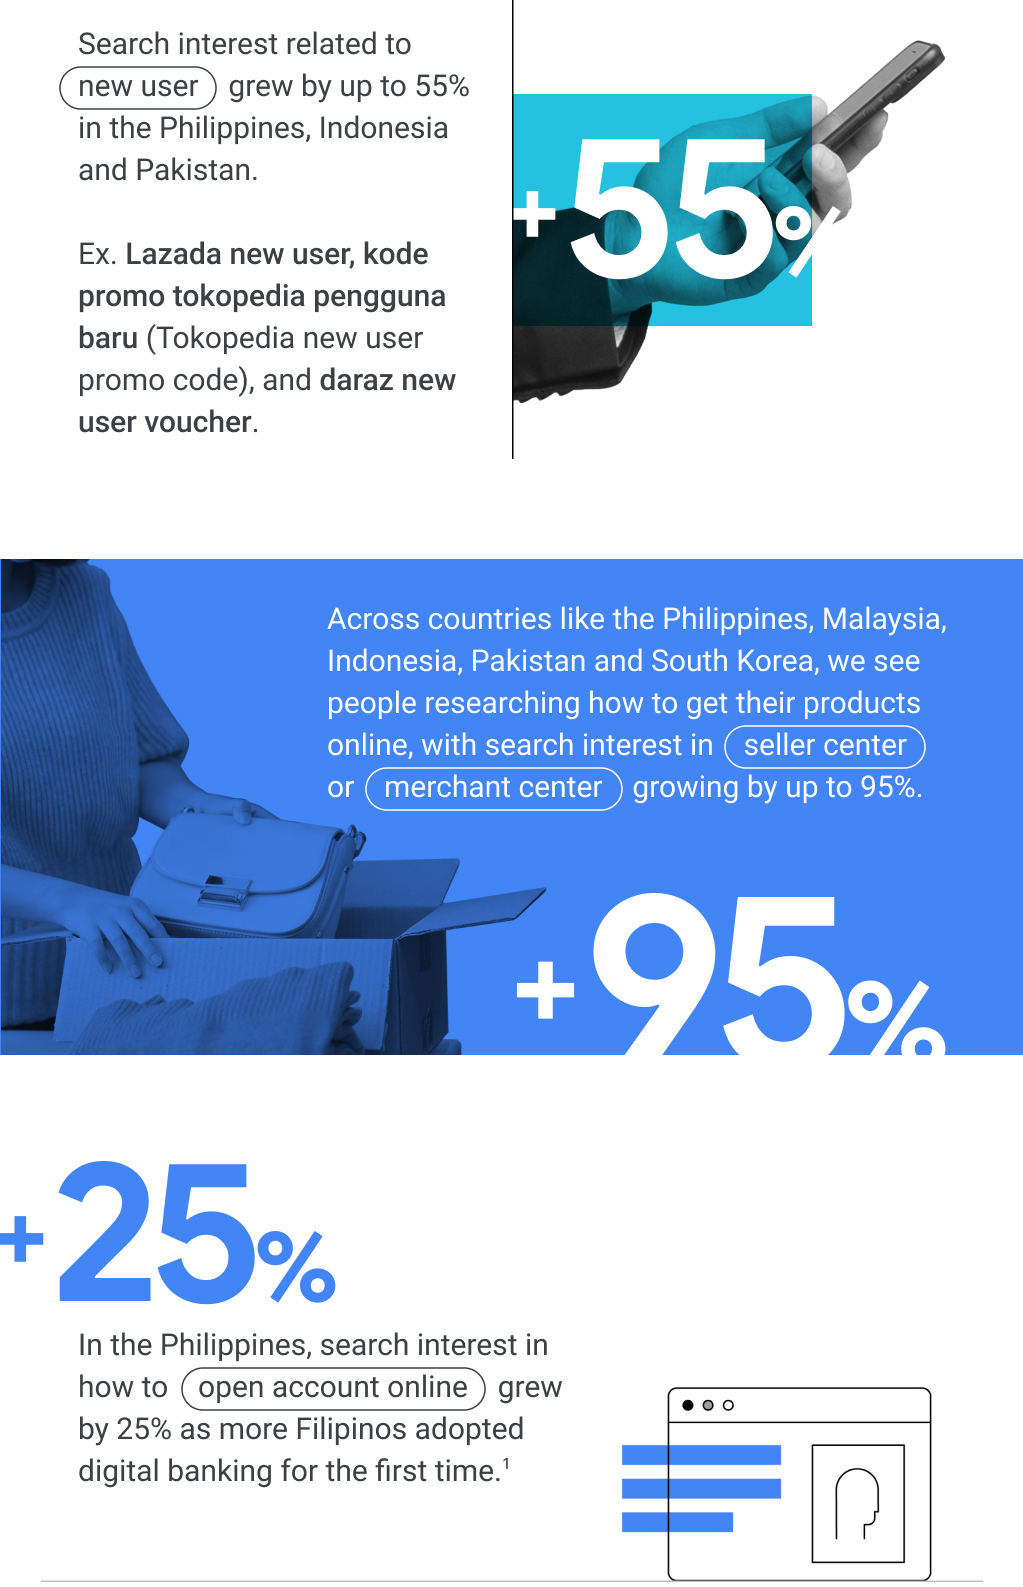 Up to 55% growth in searches related to “new users” in the Philippines, Indonesia and Pakistan. Up to 95% growth in “seller center” or “merchant center” searches. 25% growth in search interest for how to “open account online” in the Philippines.